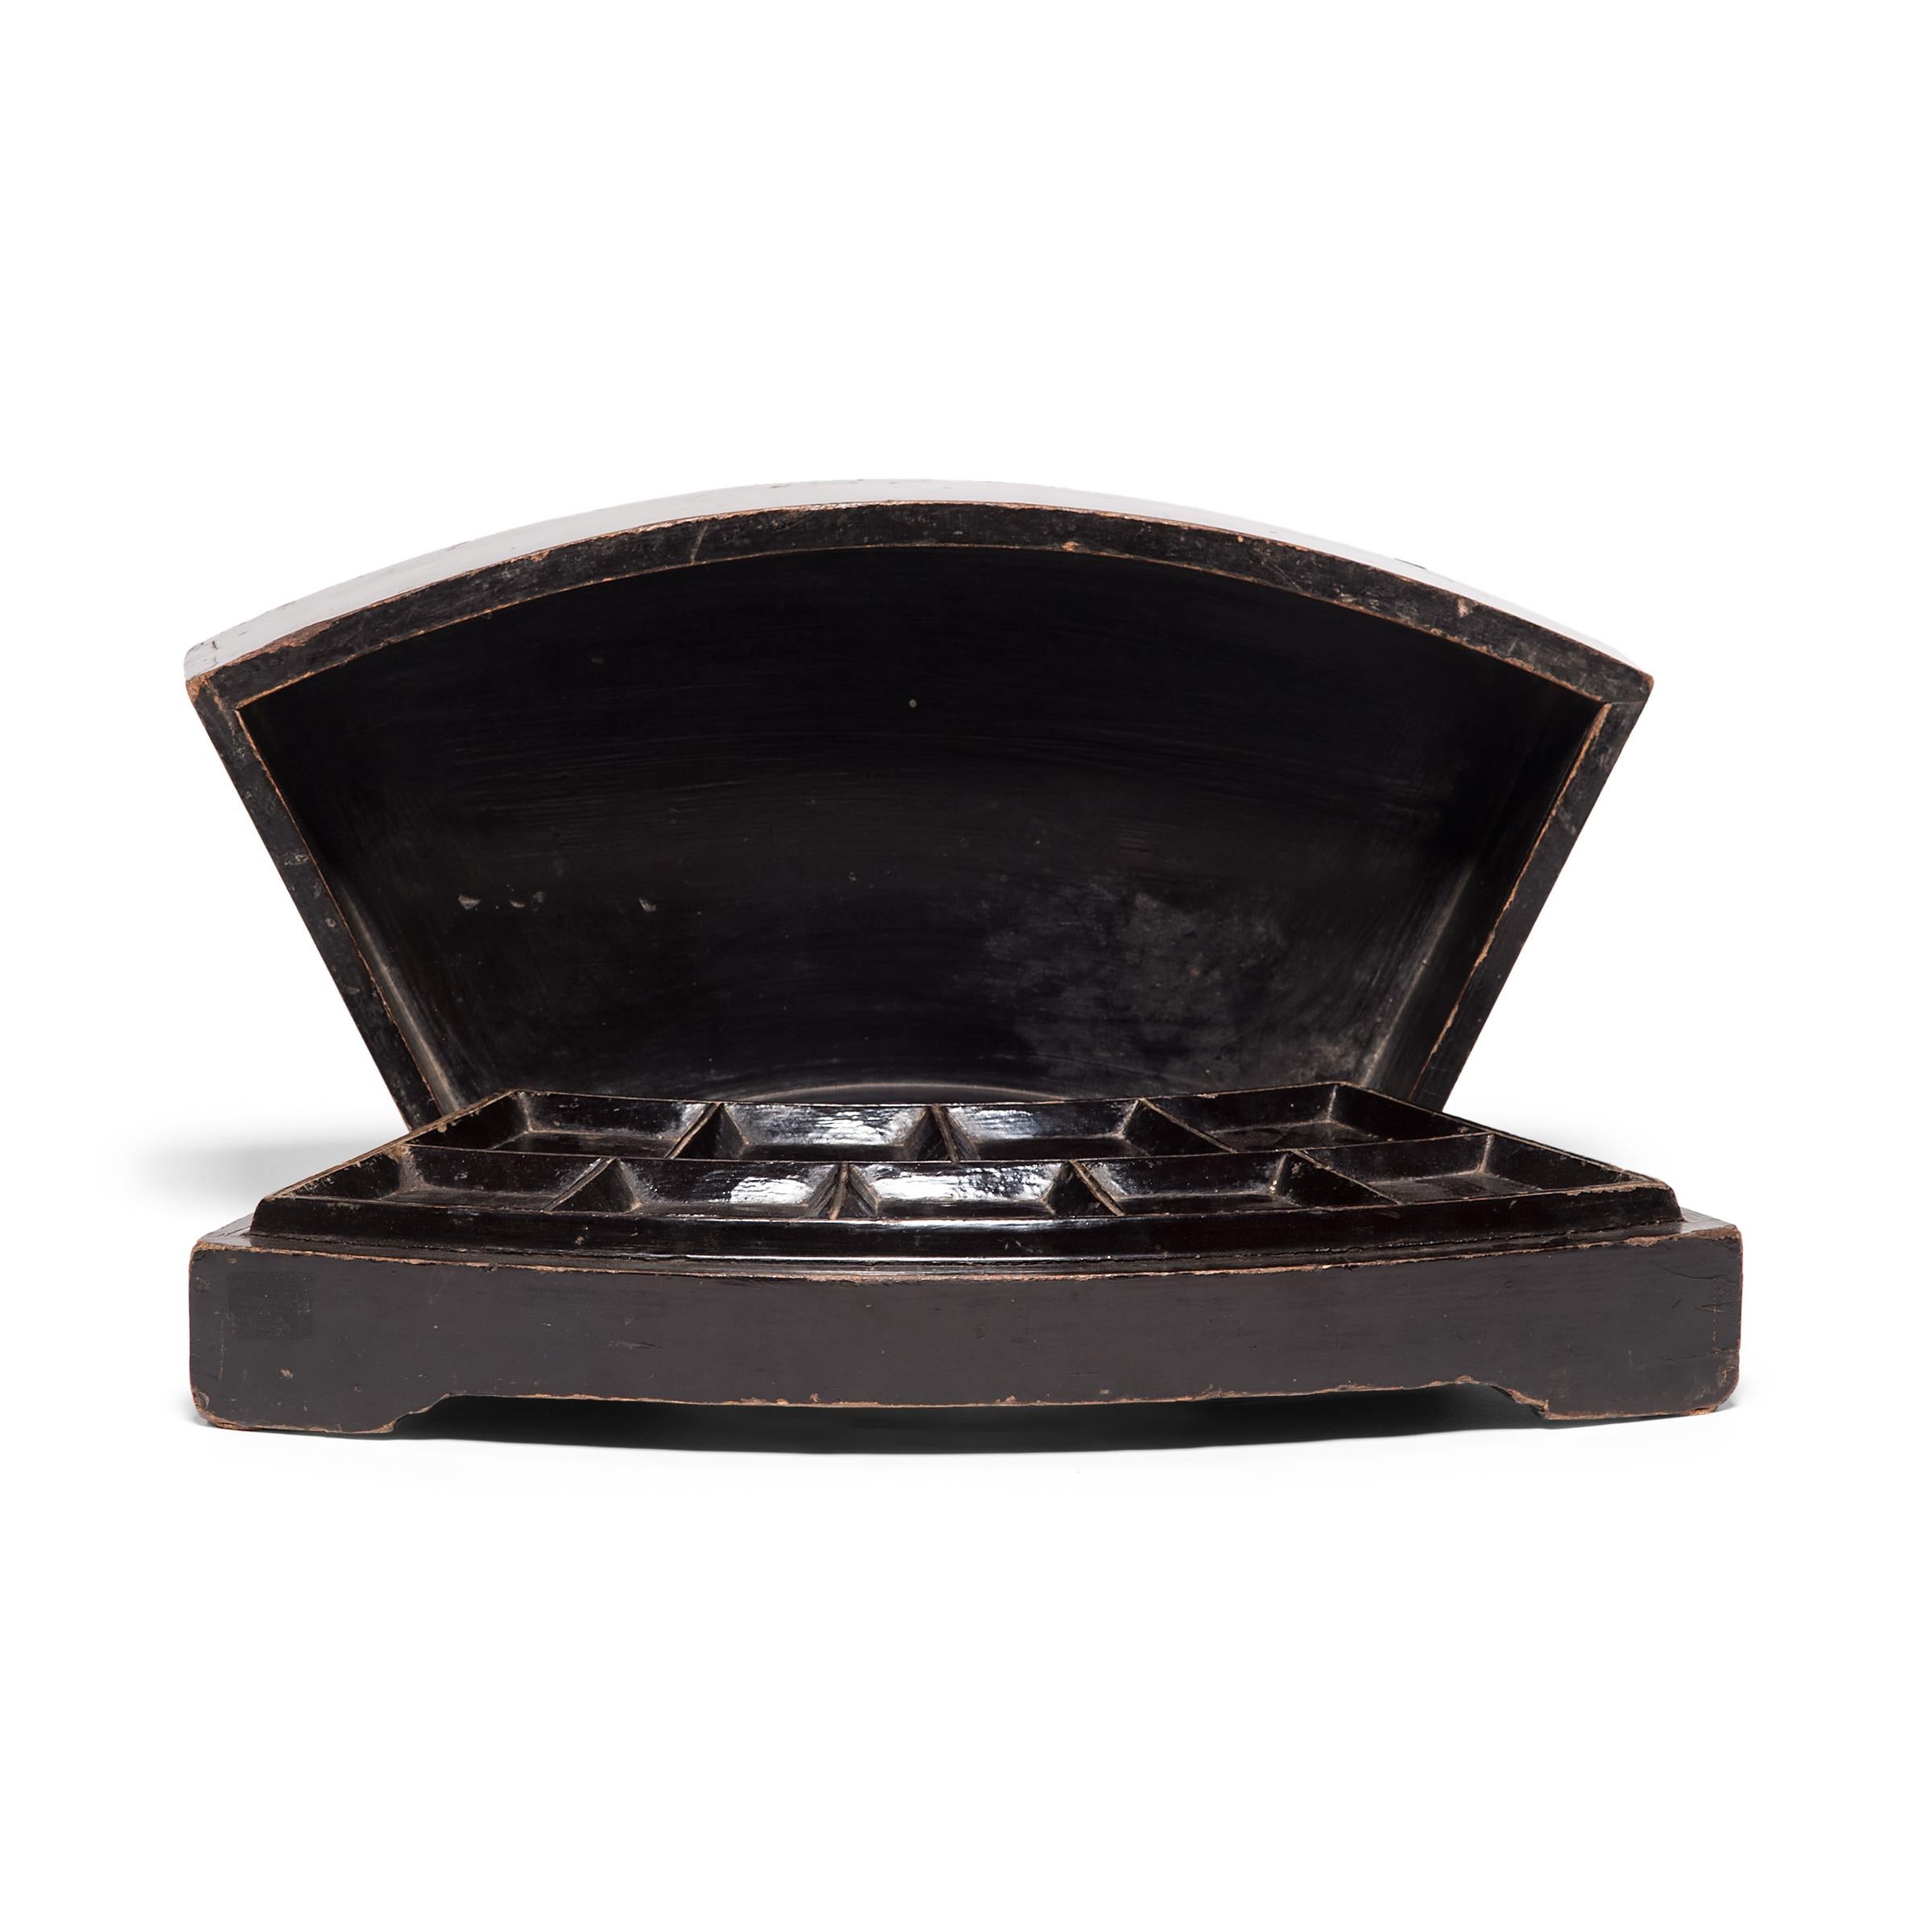 19th Century Chinese Fan Shaped Lacquer Snackbox, c. 1850